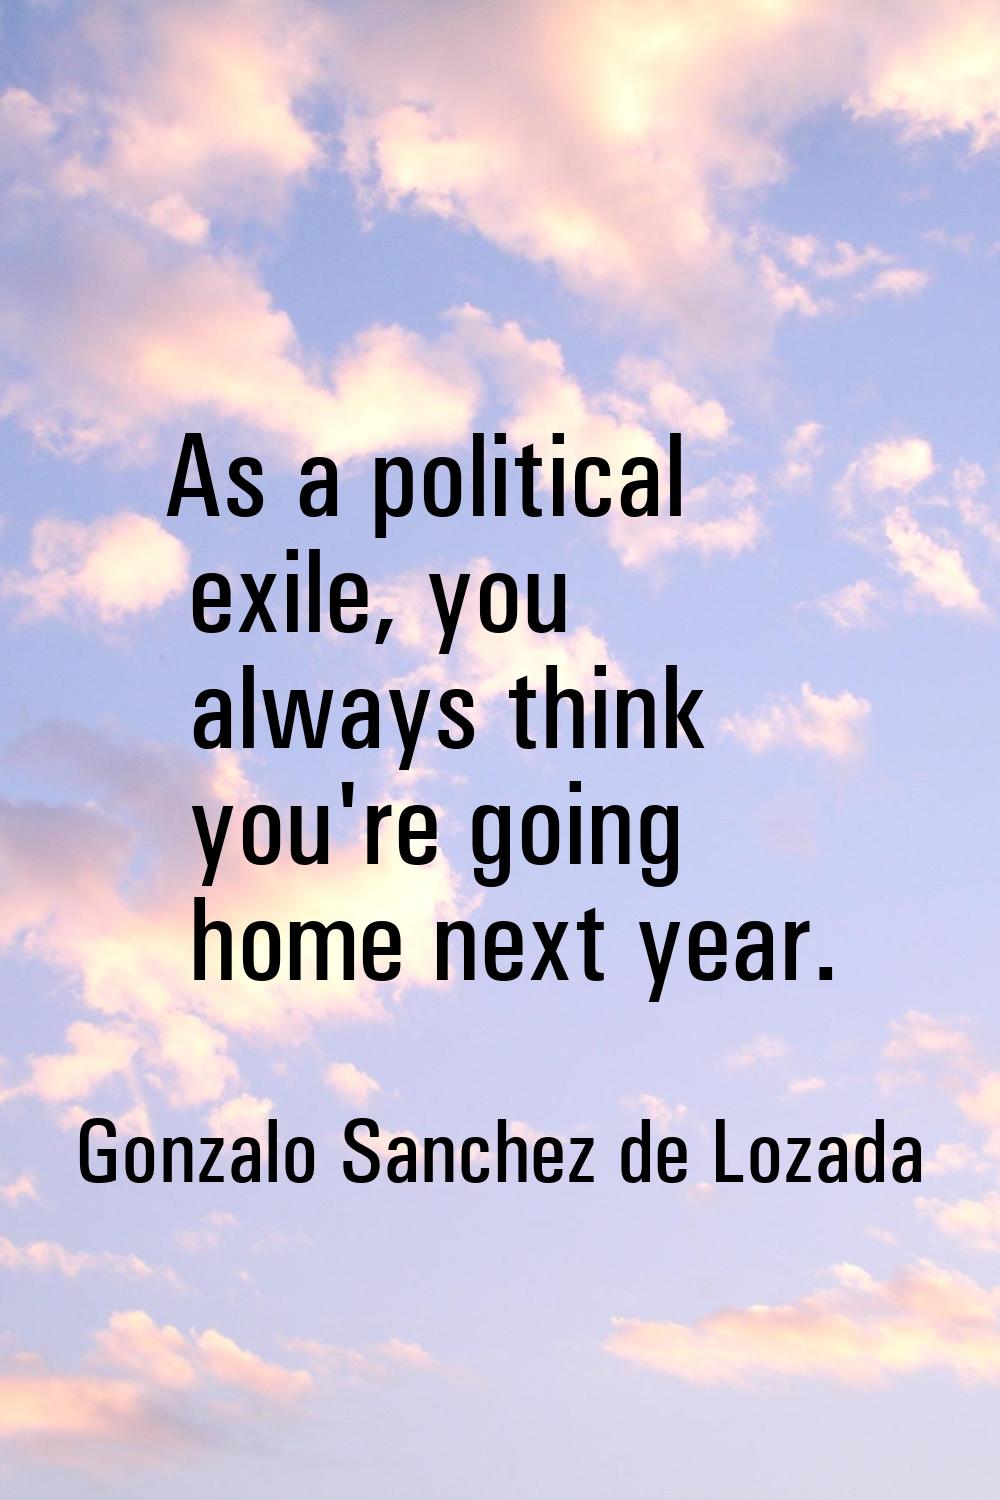 As a political exile, you always think you're going home next year.